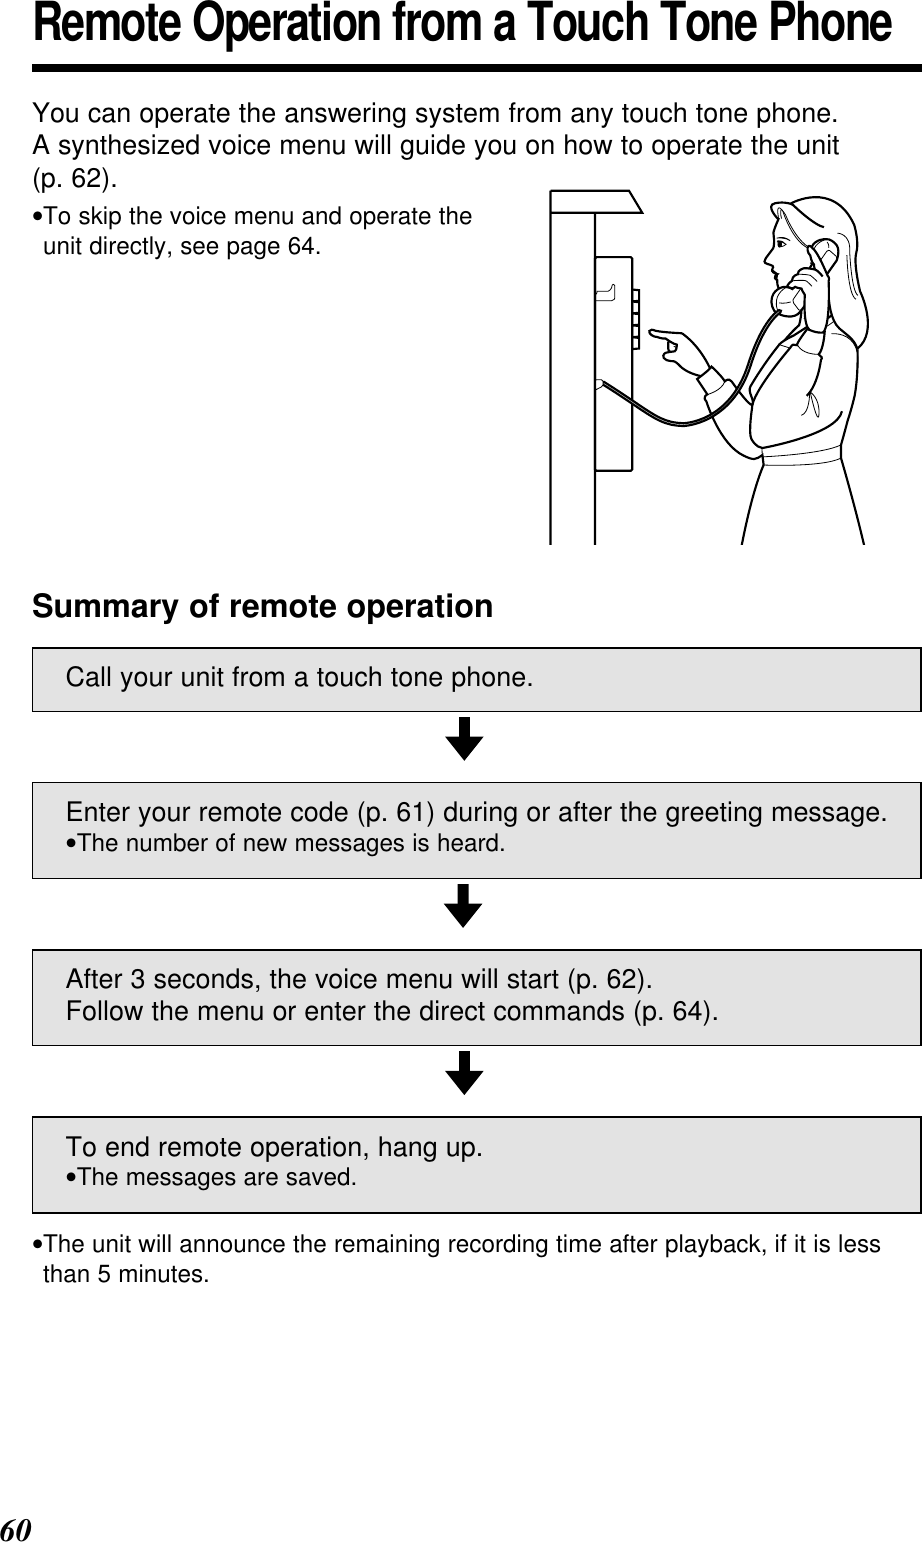 60Remote Operation from a Touch Tone PhoneYou can operate the answering system from any touch tone phone. A synthesized voice menu will guide you on how to operate the unit(p. 62).•To skip the voice menu and operate theunit directly, see page 64.Summary of remote operationCall your unit from a touch tone phone.Enter your remote code (p. 61) during or after the greeting message.•The number of new messages is heard.After 3 seconds, the voice menu will start (p. 62).Follow the menu or enter the direct commands (p. 64).To end remote operation, hang up.•The messages are saved.•The unit will announce the remaining recording time after playback, if it is lessthan 5 minutes.